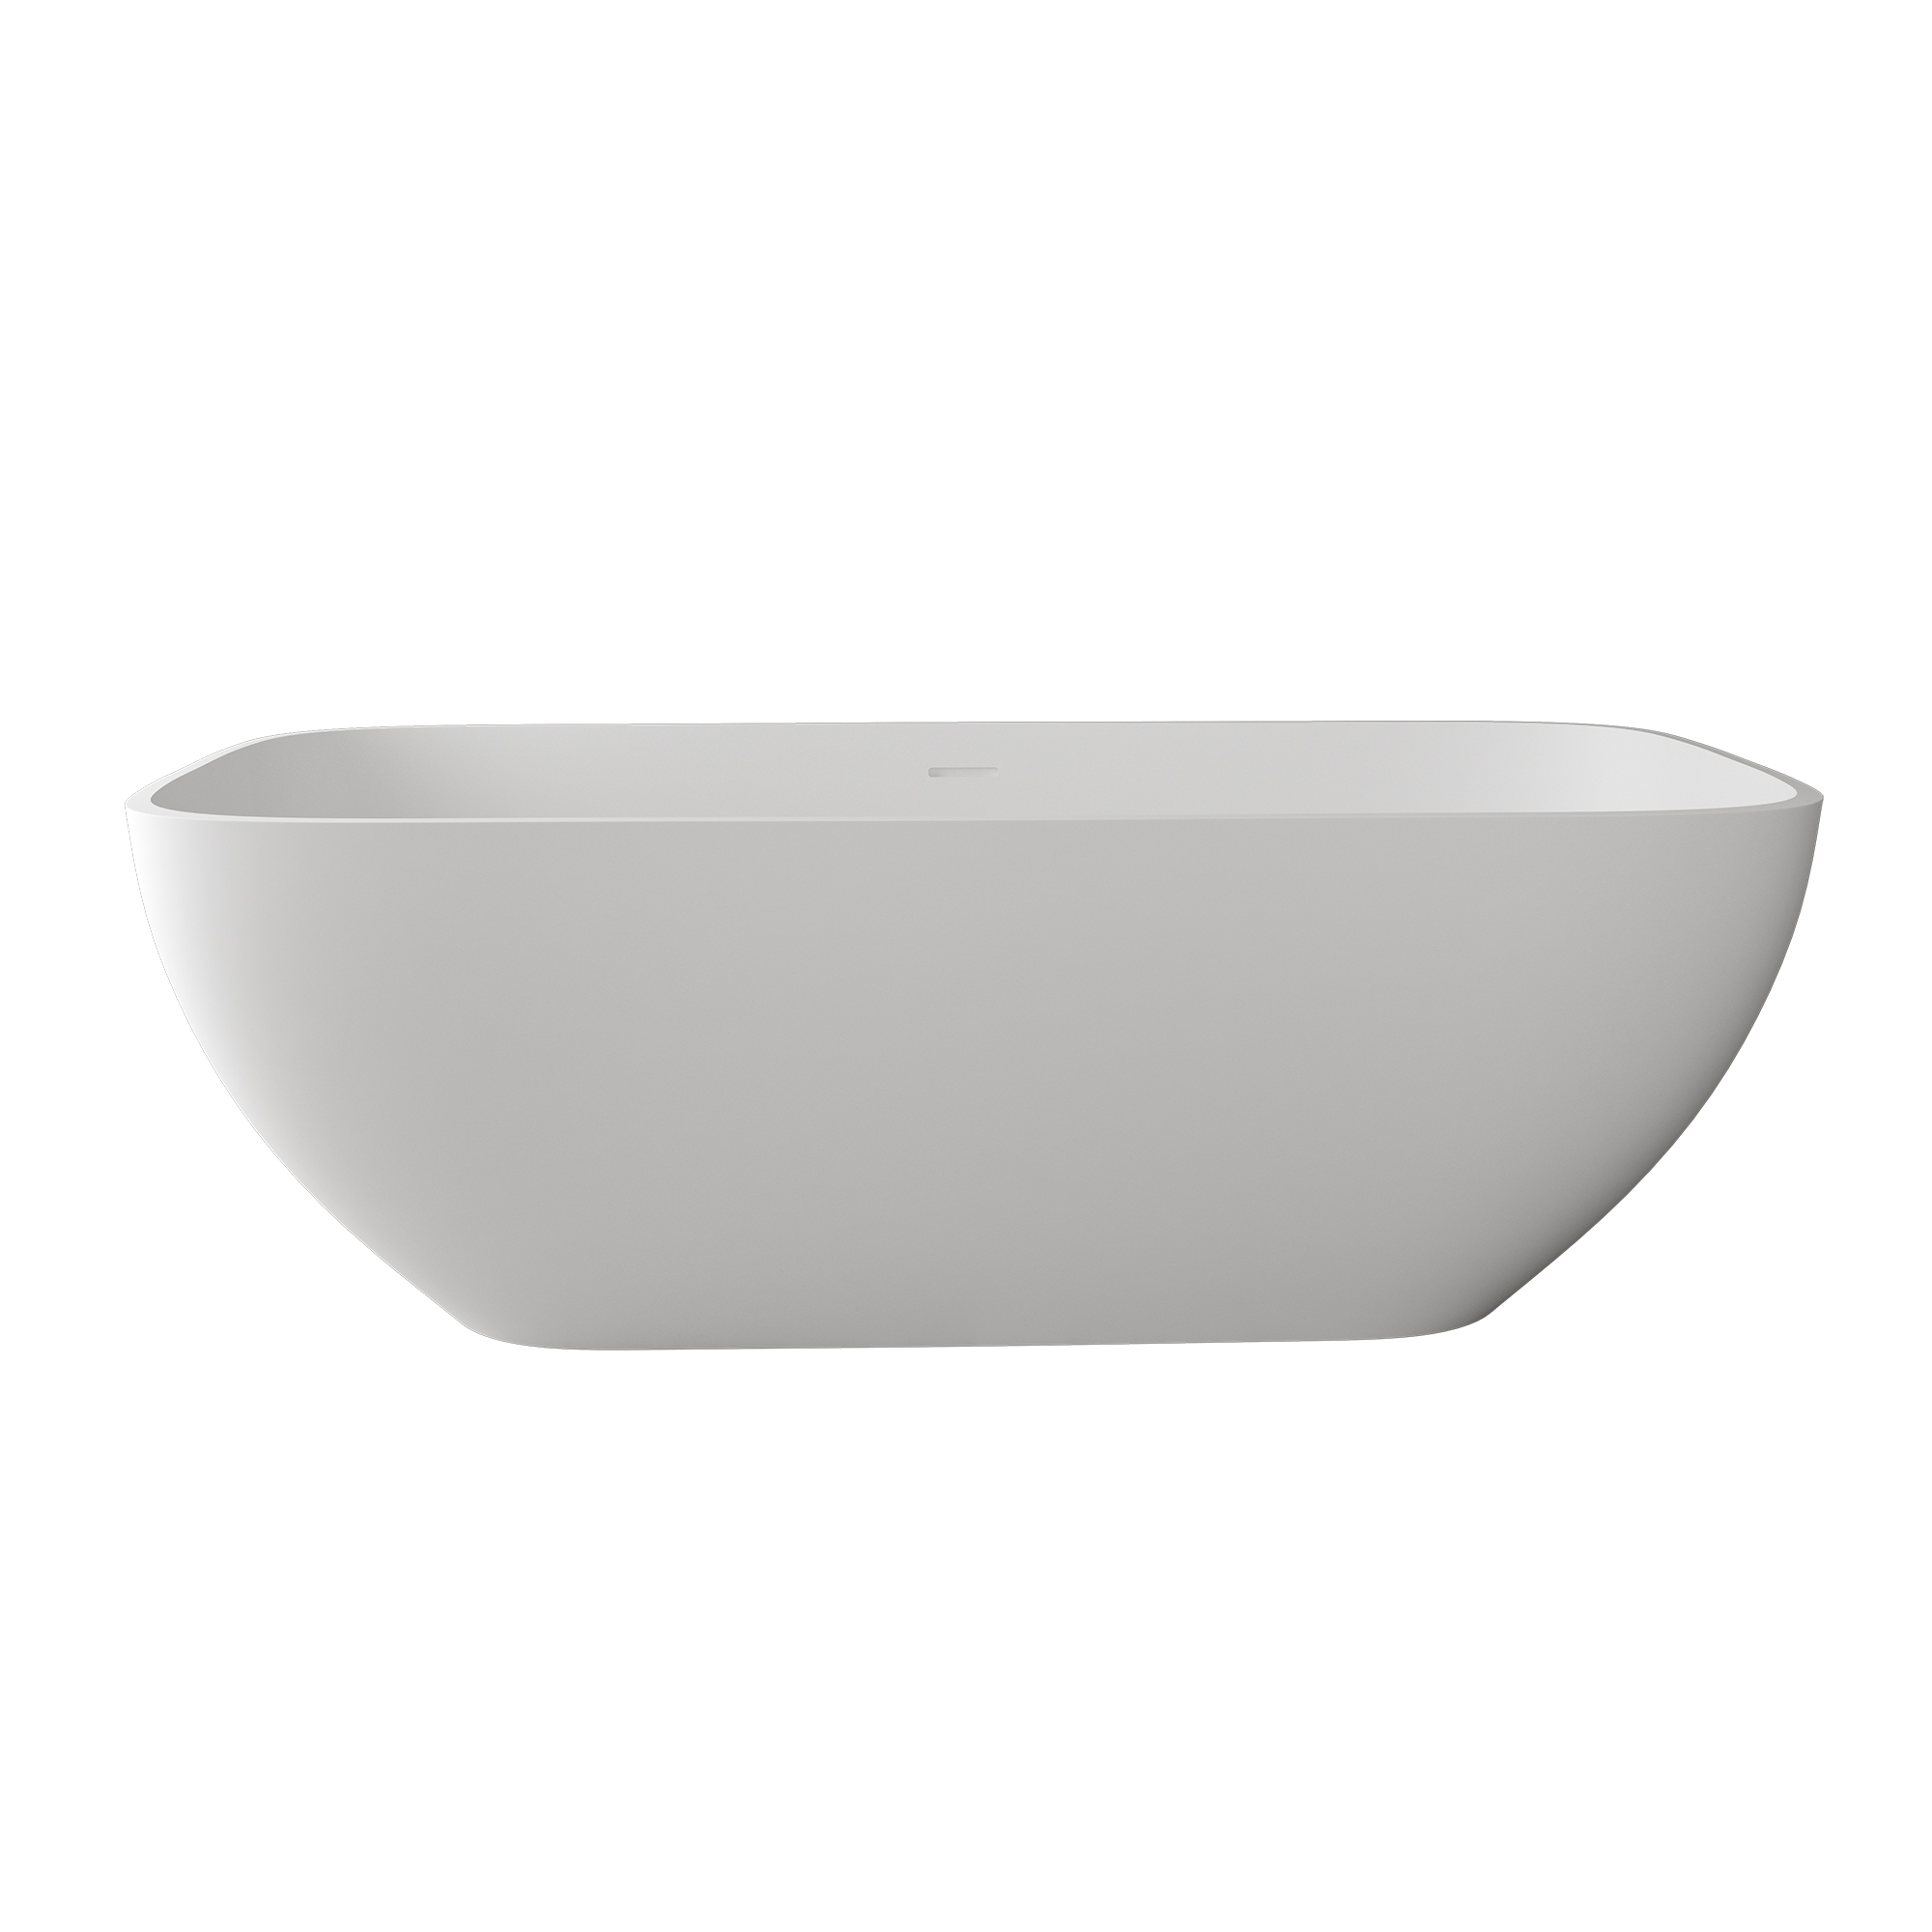 67" Solid Surface Freestanding Bathtub, Stone Resin Freestanding Tubs with Overflow and Drain, Matte White